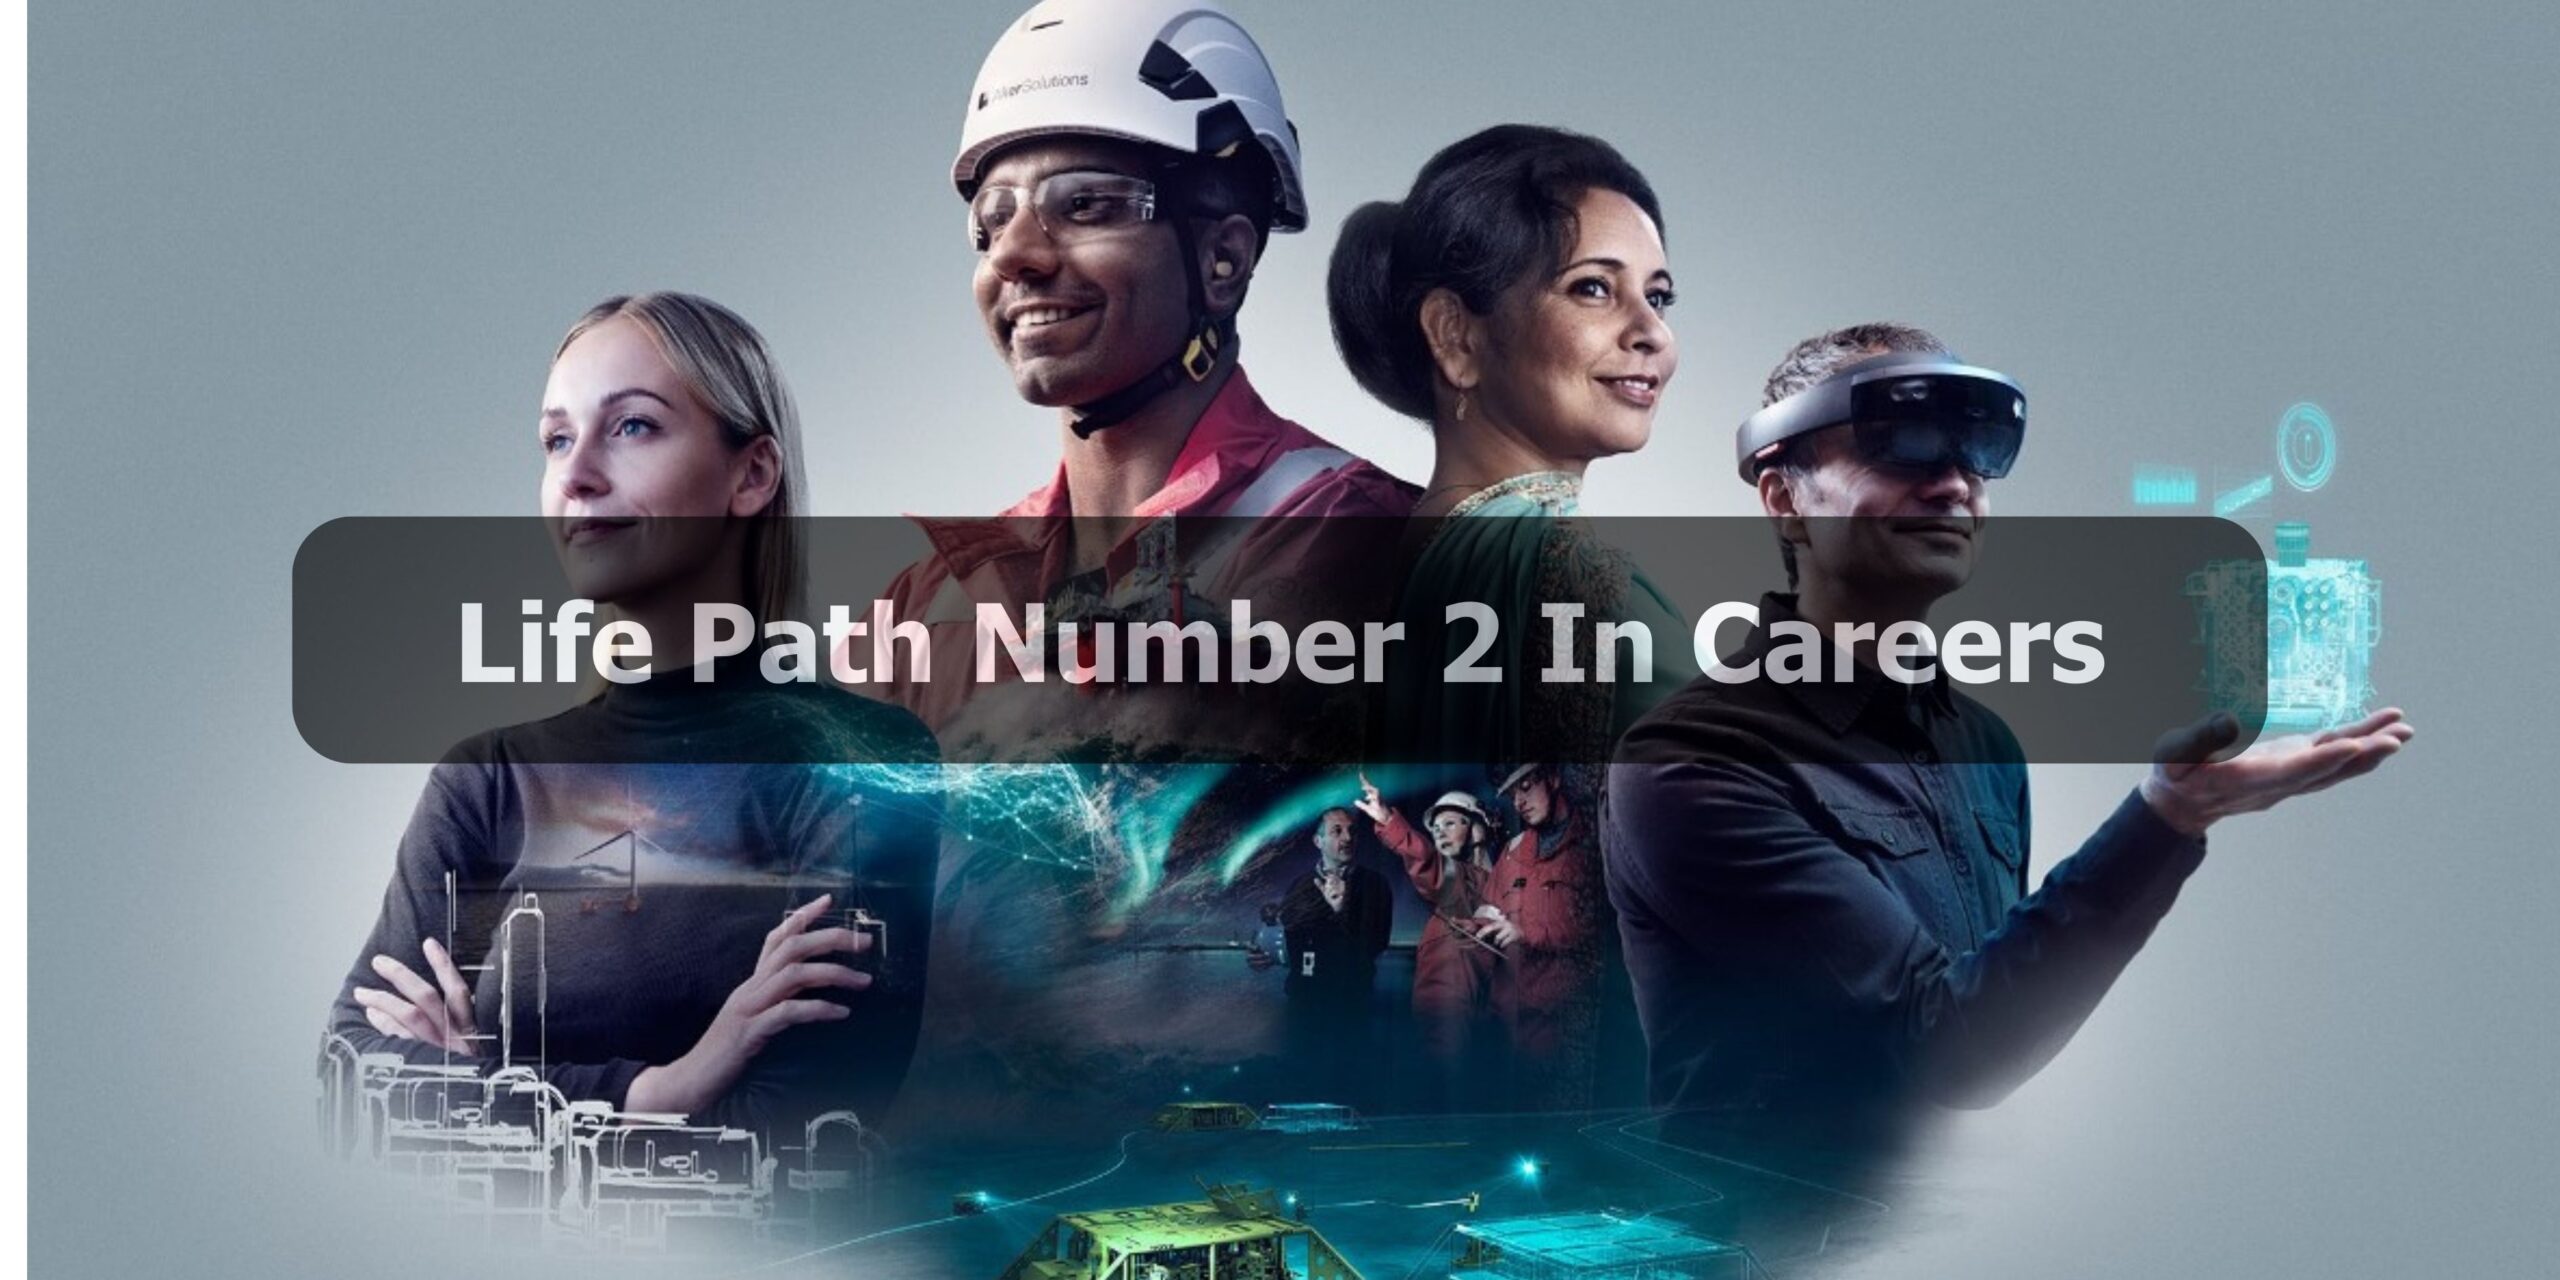 Life Path Number 2 Careers Characteristics, Top 5 Career Choices and Compatibility